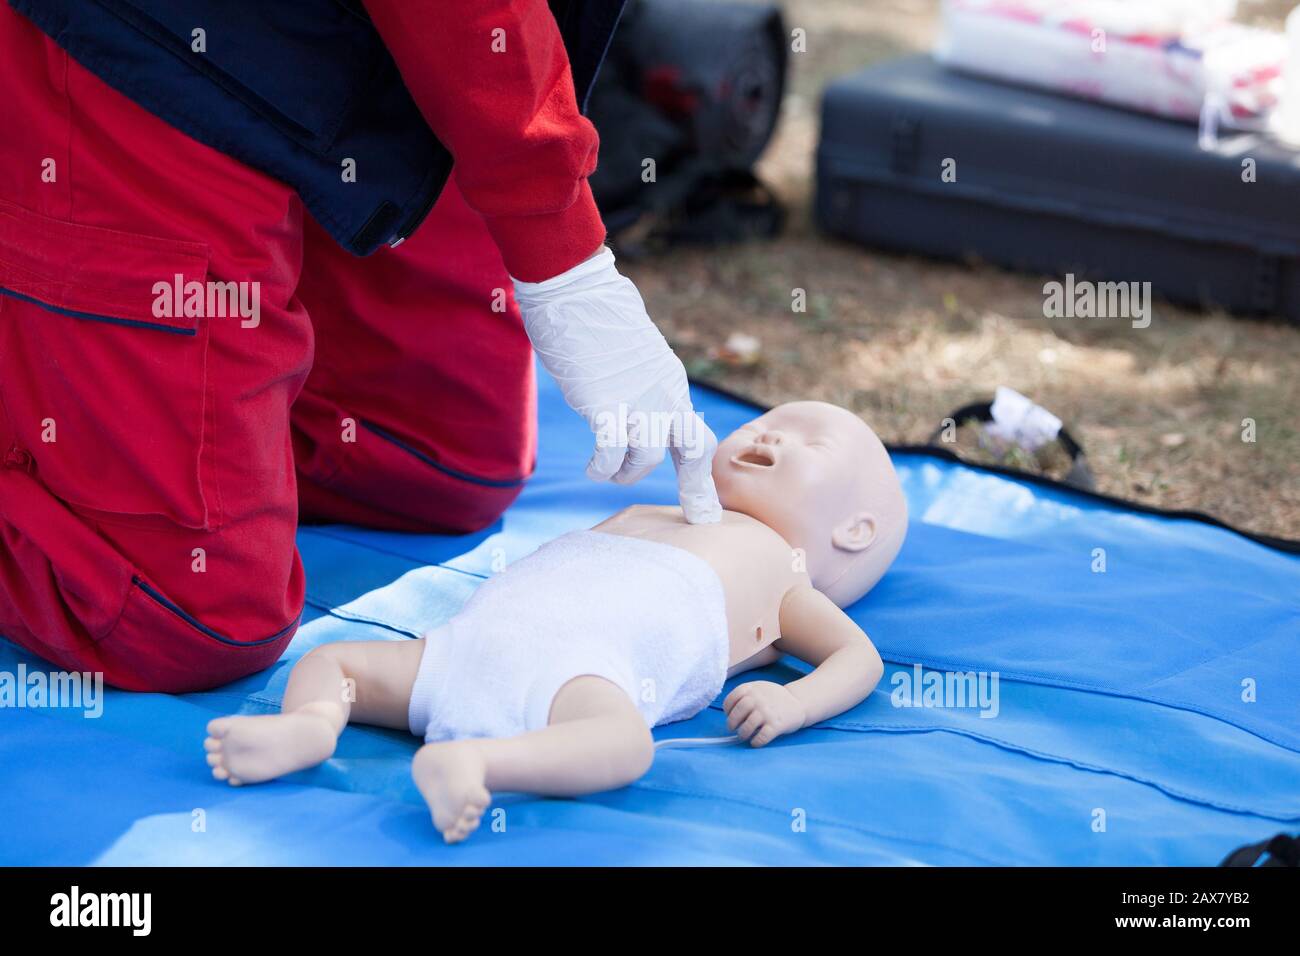 Paramedic performing CPR on baby dummy with two-finger chest compression Stock Photo